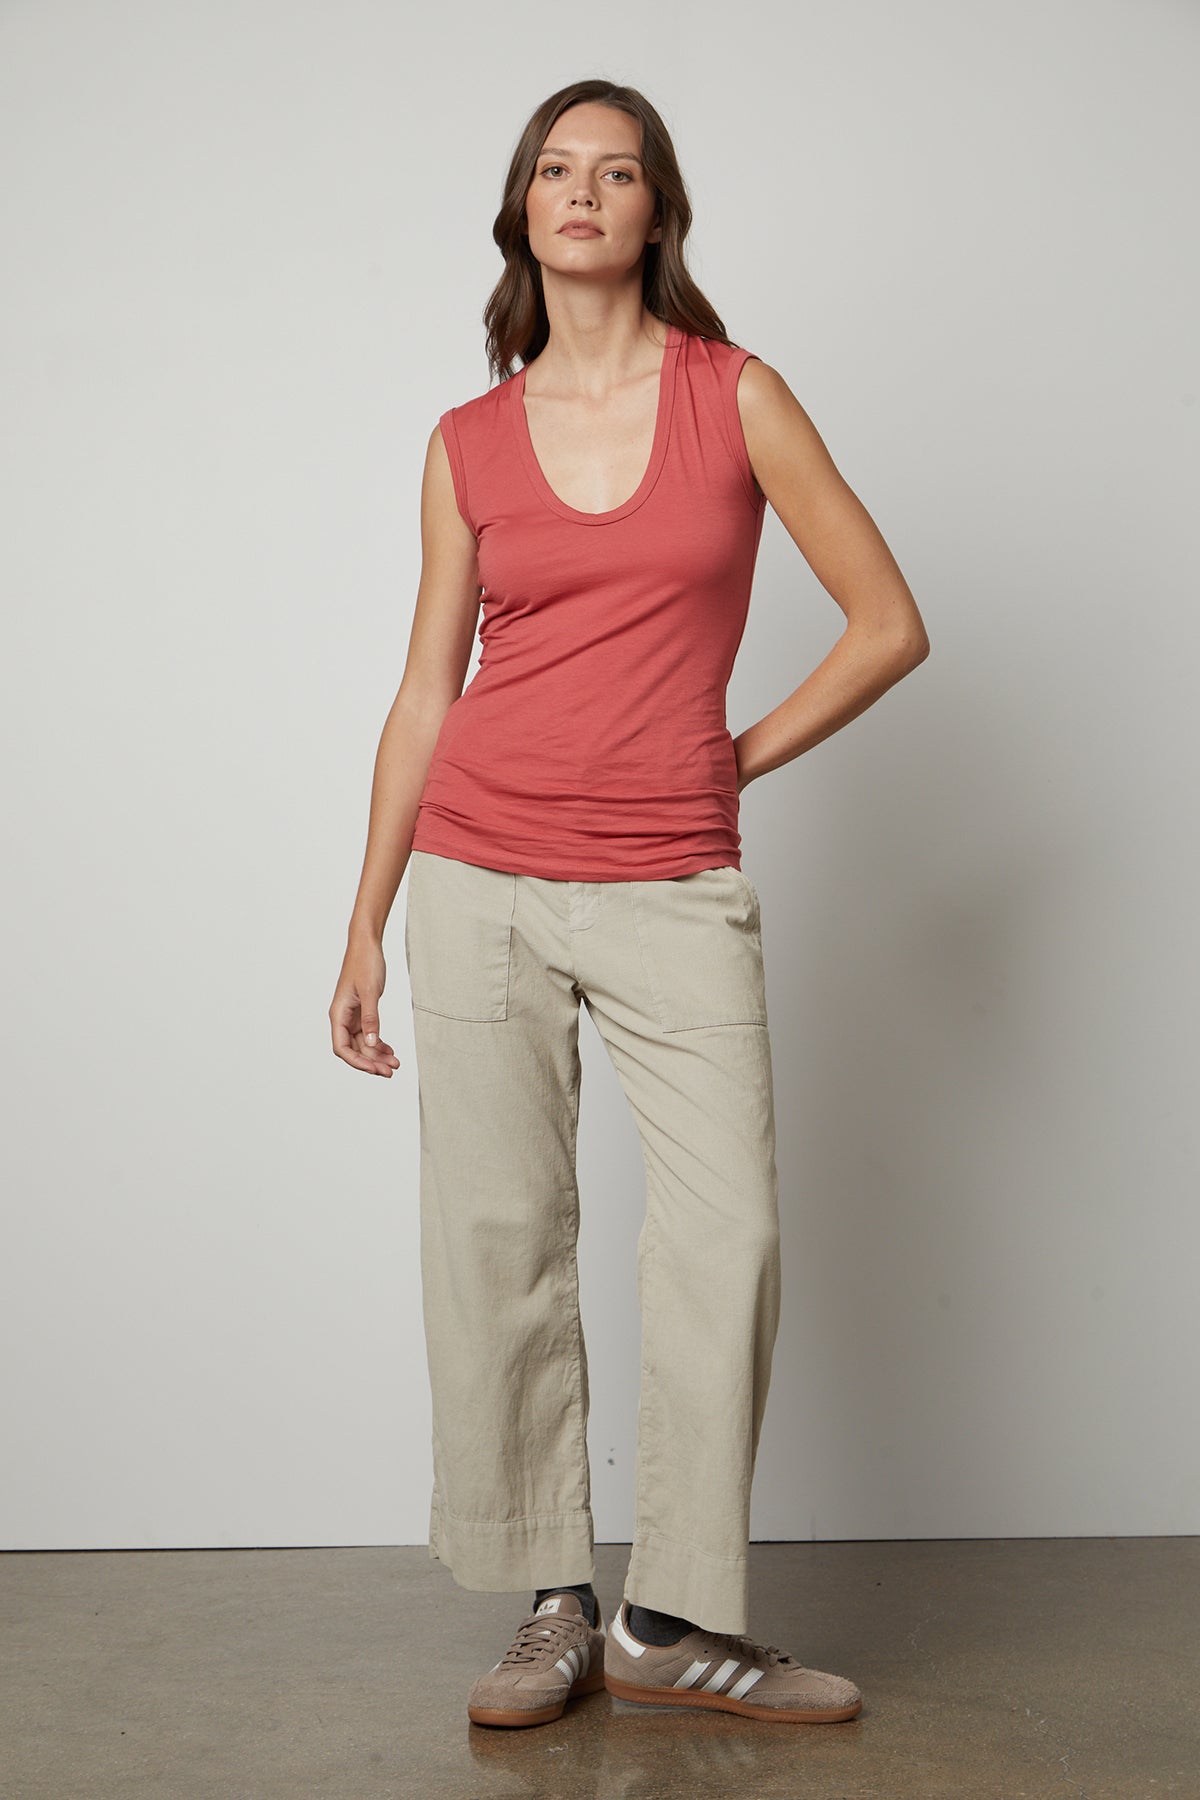   A woman wearing a Velvet by Graham & Spencer ESTINA GAUZY WHISPER FITTED TANK TOP and khaki pants. 